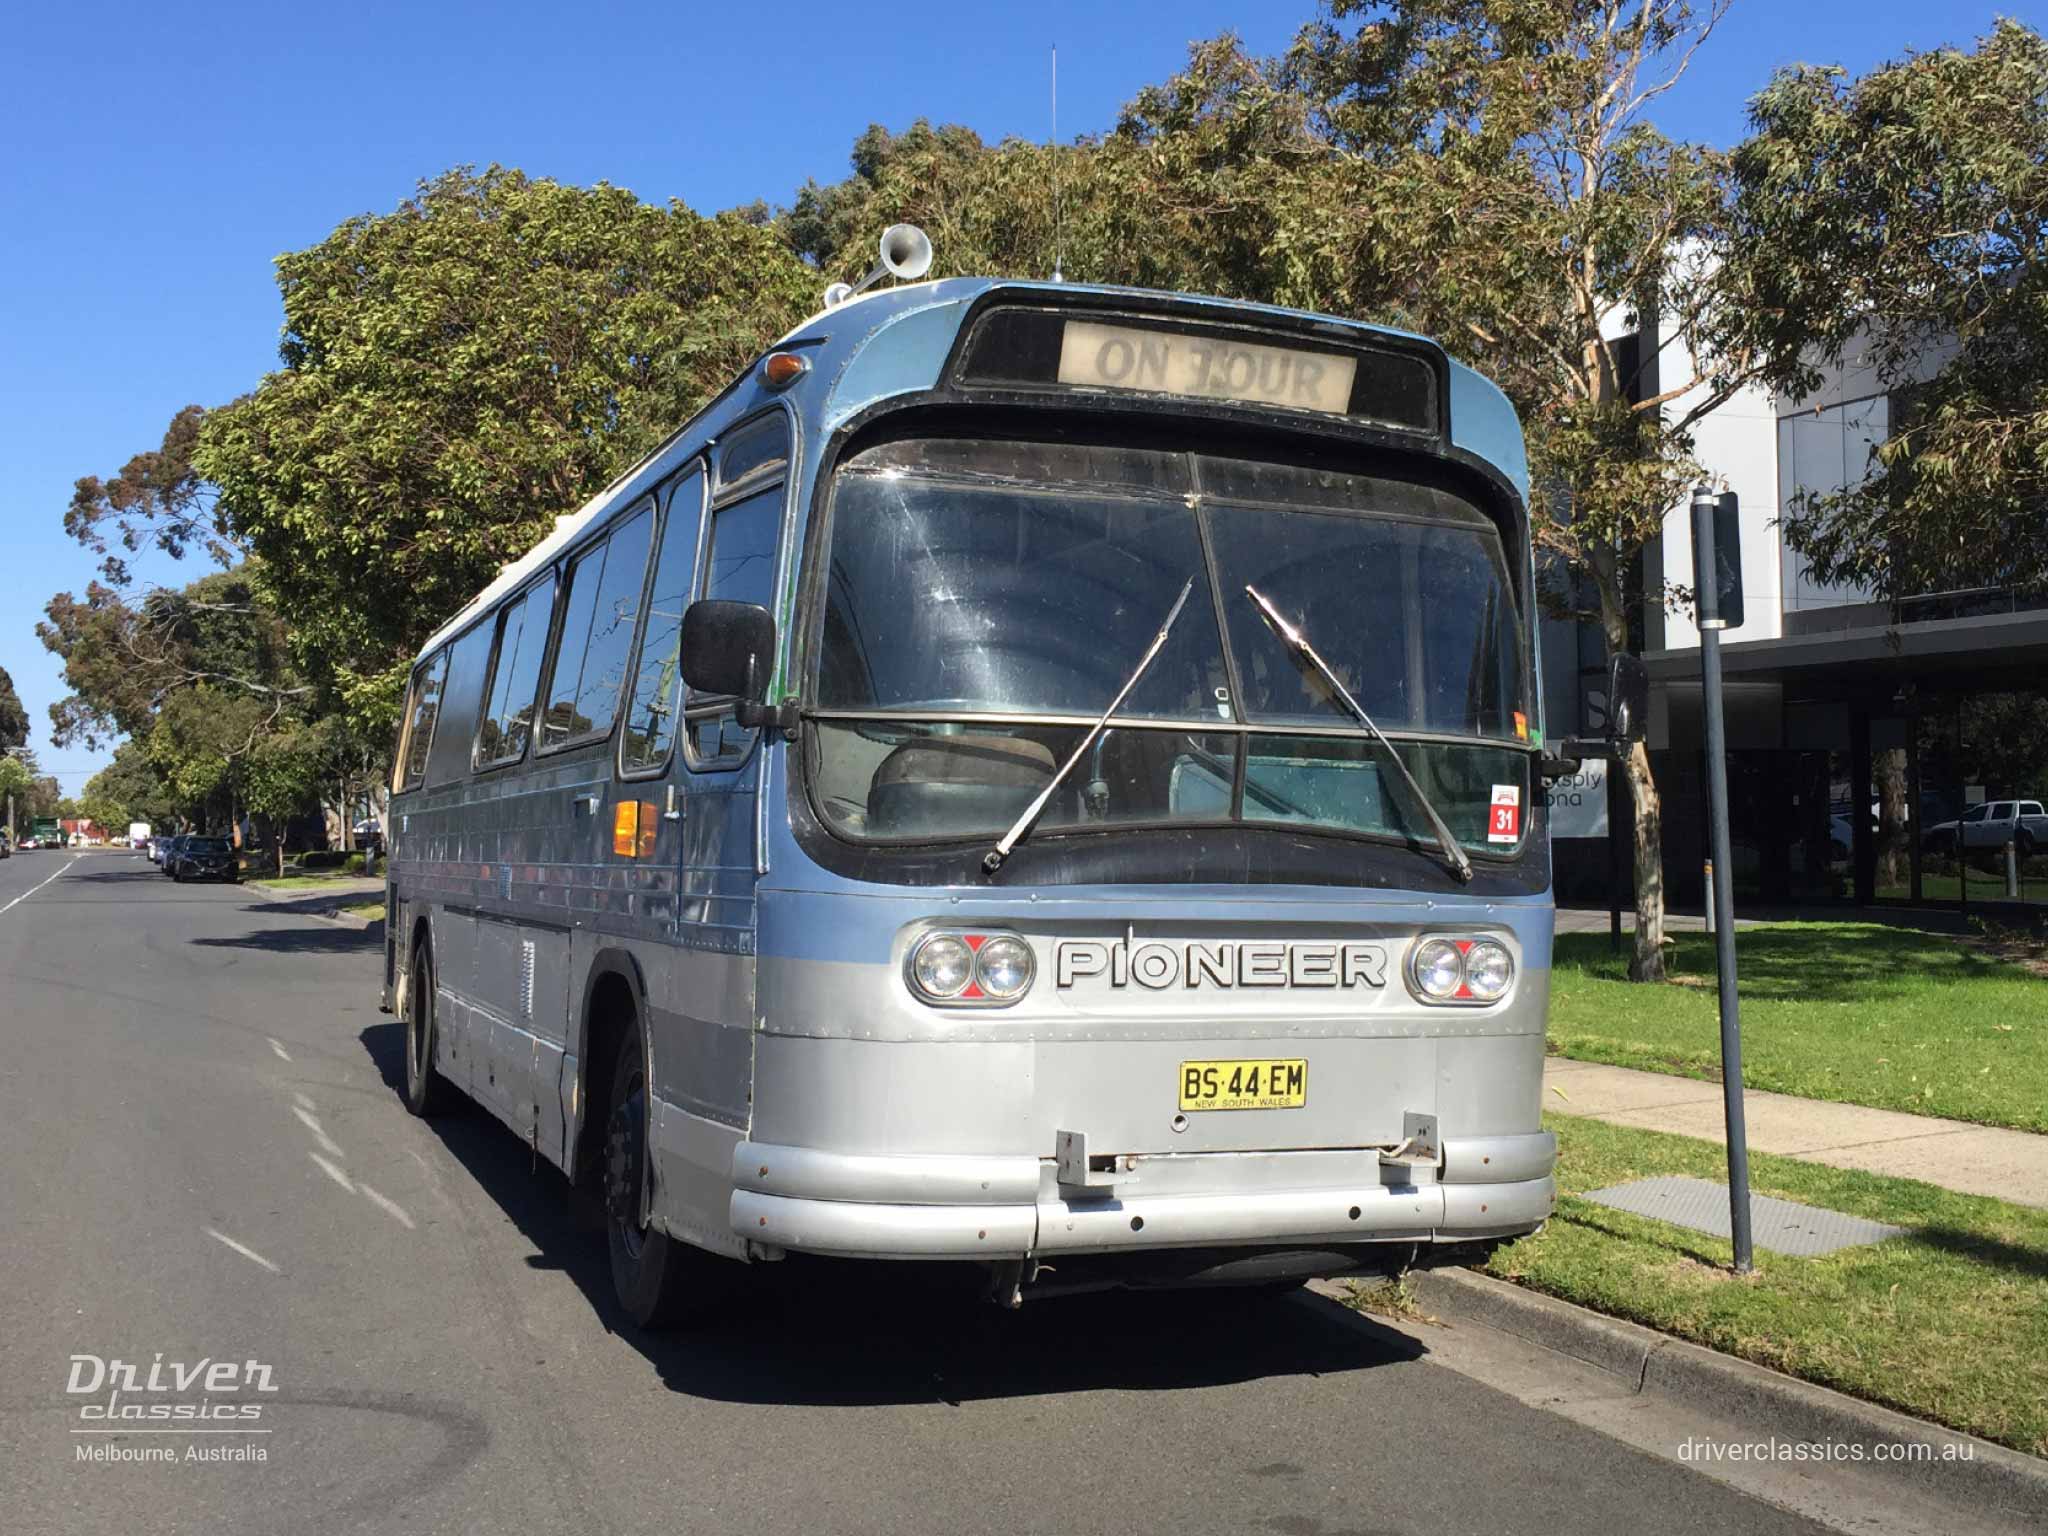 Ansair Scenicruiser bus, GMC 1967 version, front and side, on Ricketts Rd, August 2018